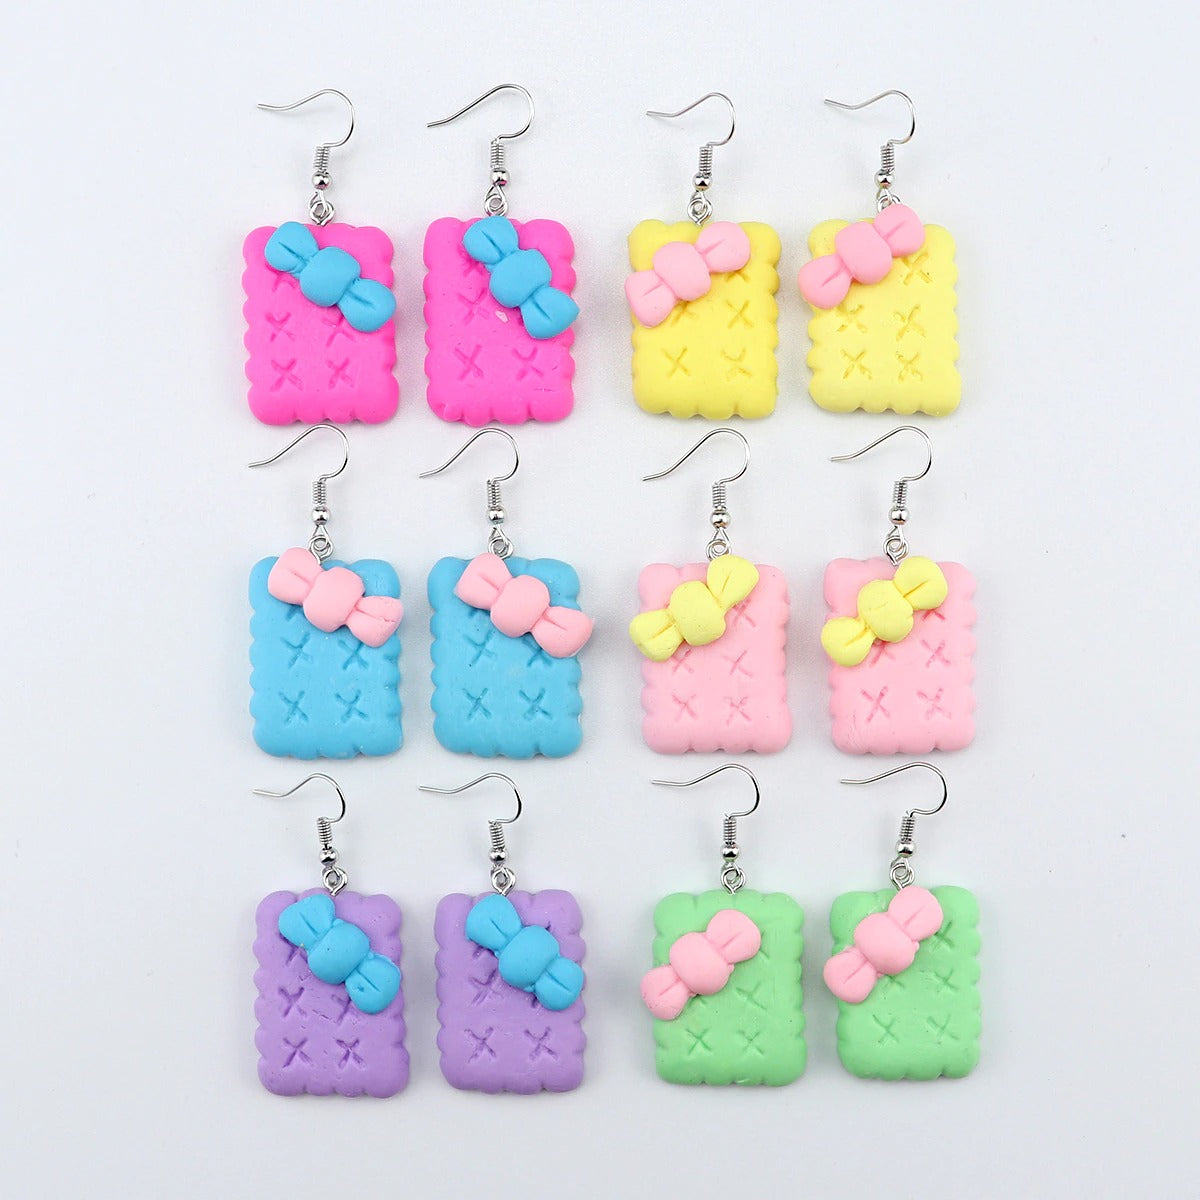 Teenytopia Colourful Cookie Earrings - Brightly-coloured polymer clay earrings made to resemble stylised cookies or crackers. 